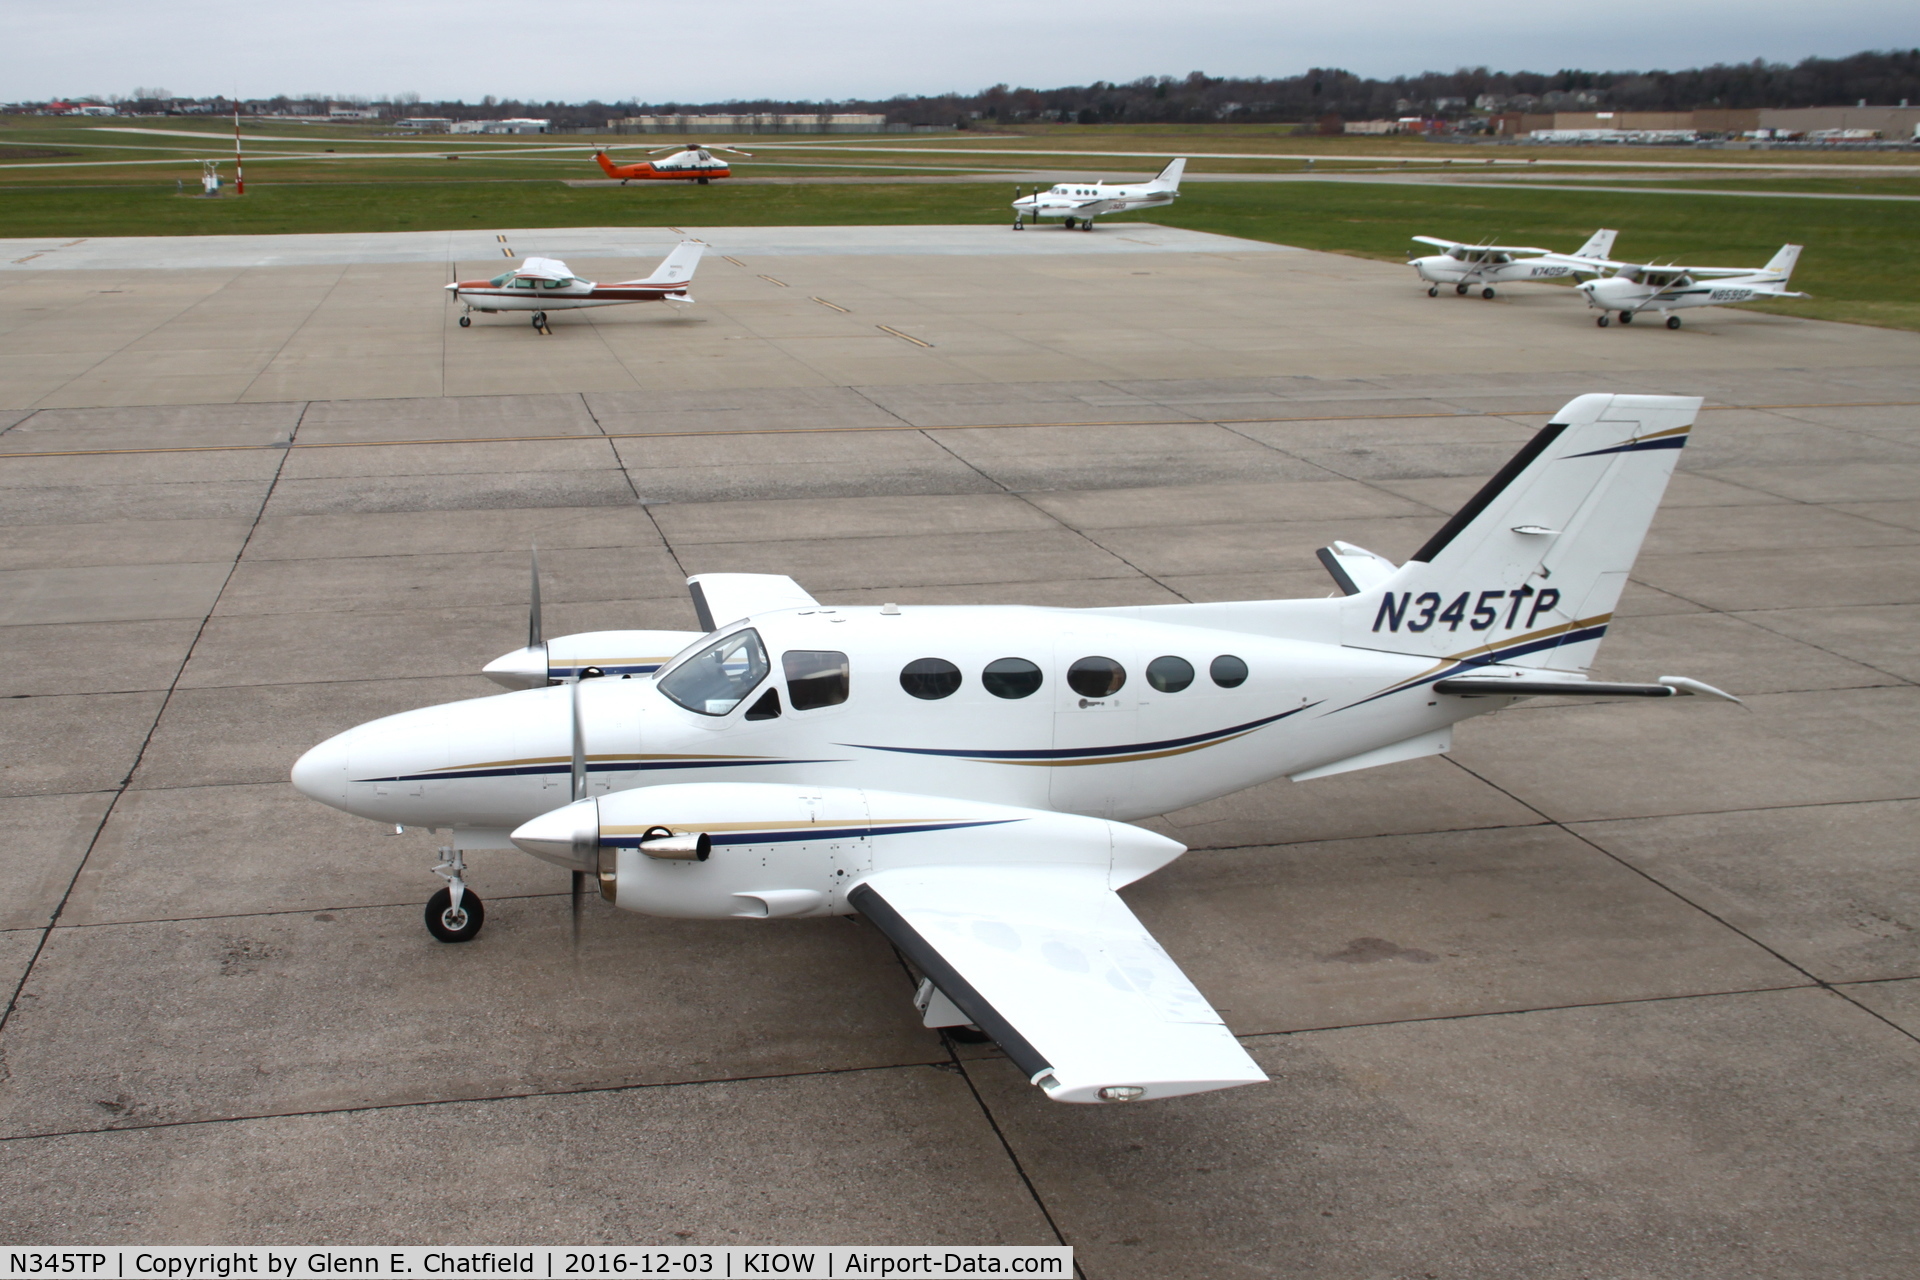 N345TP, Cessna 425 Corsair C/N 425-0005, Spied from the observation deck